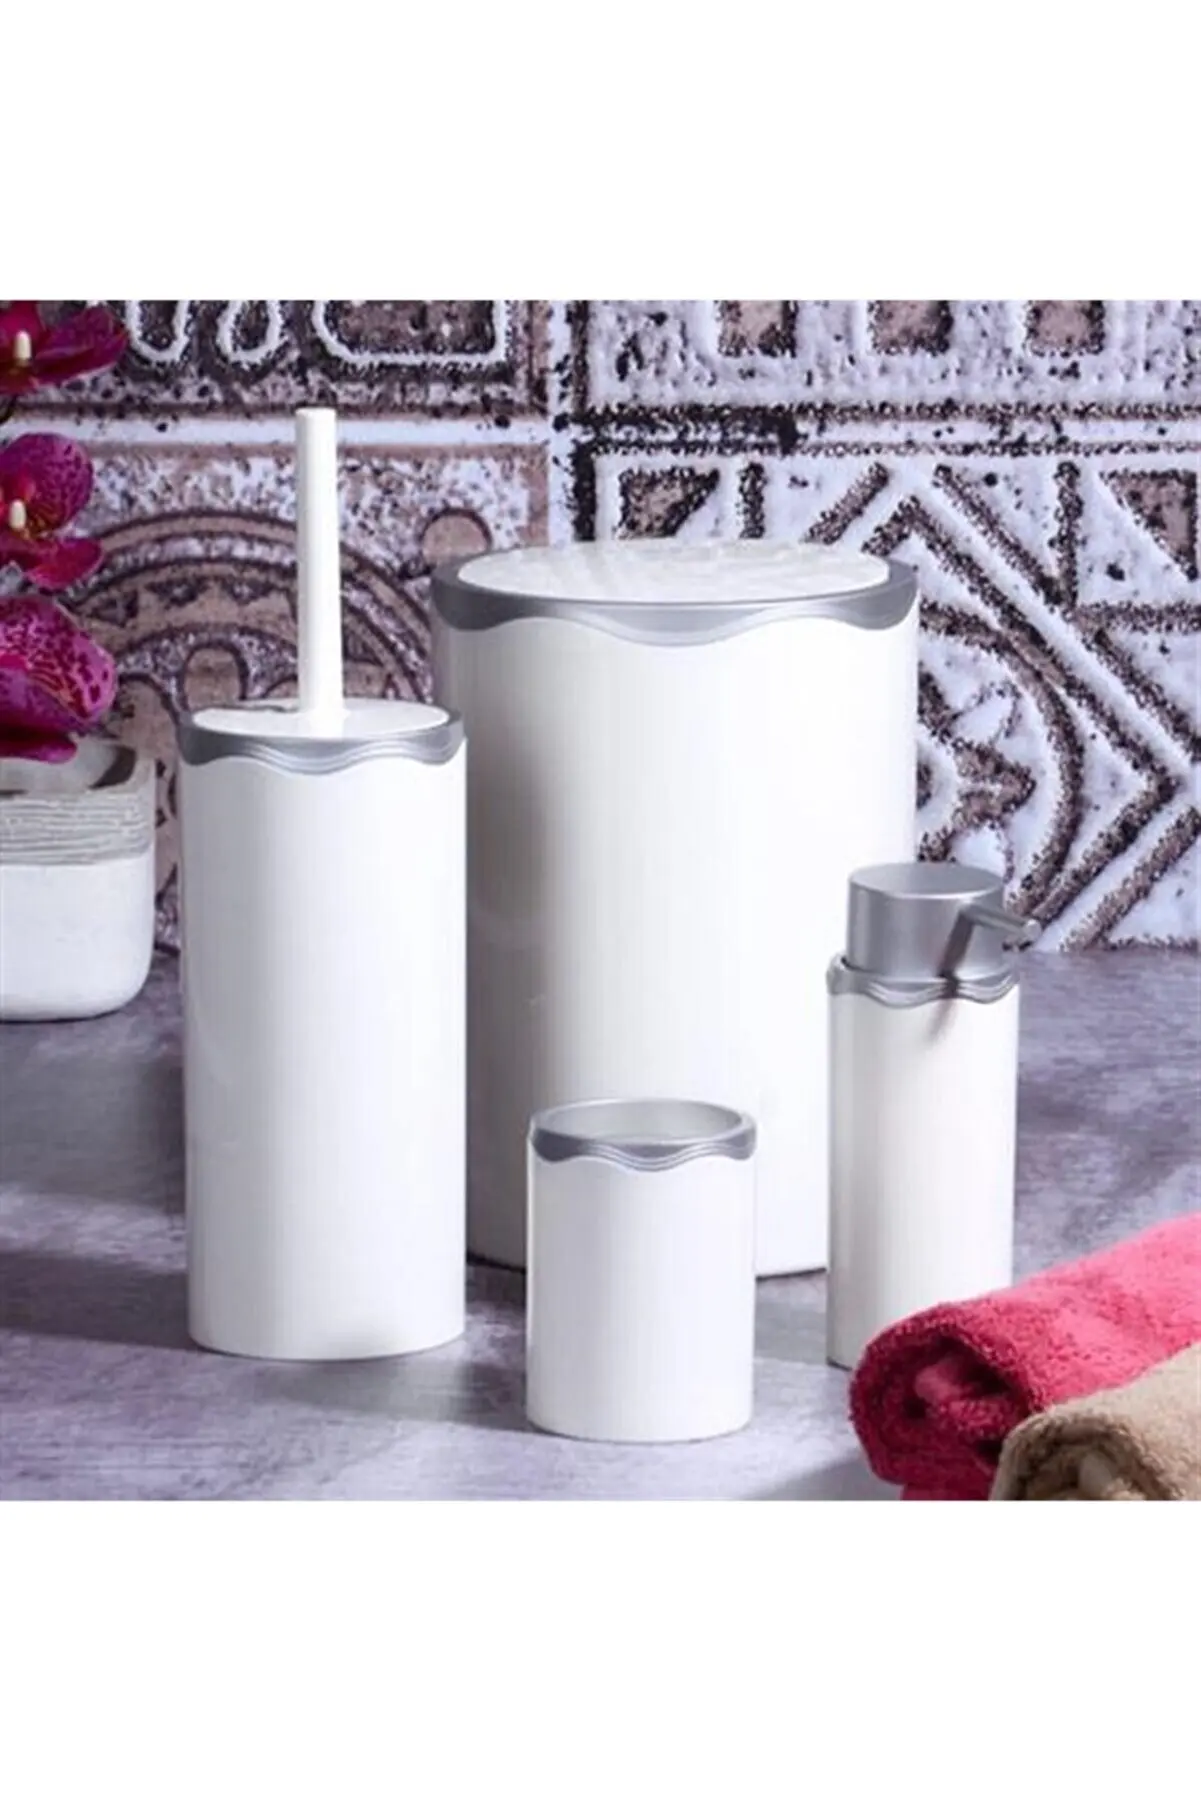 Bathroom Set White Silver 4 Piece Acrylic Bath Set Trash Can consists of Liquid Soap Dispenser, Toothbrush Holder and Toilet